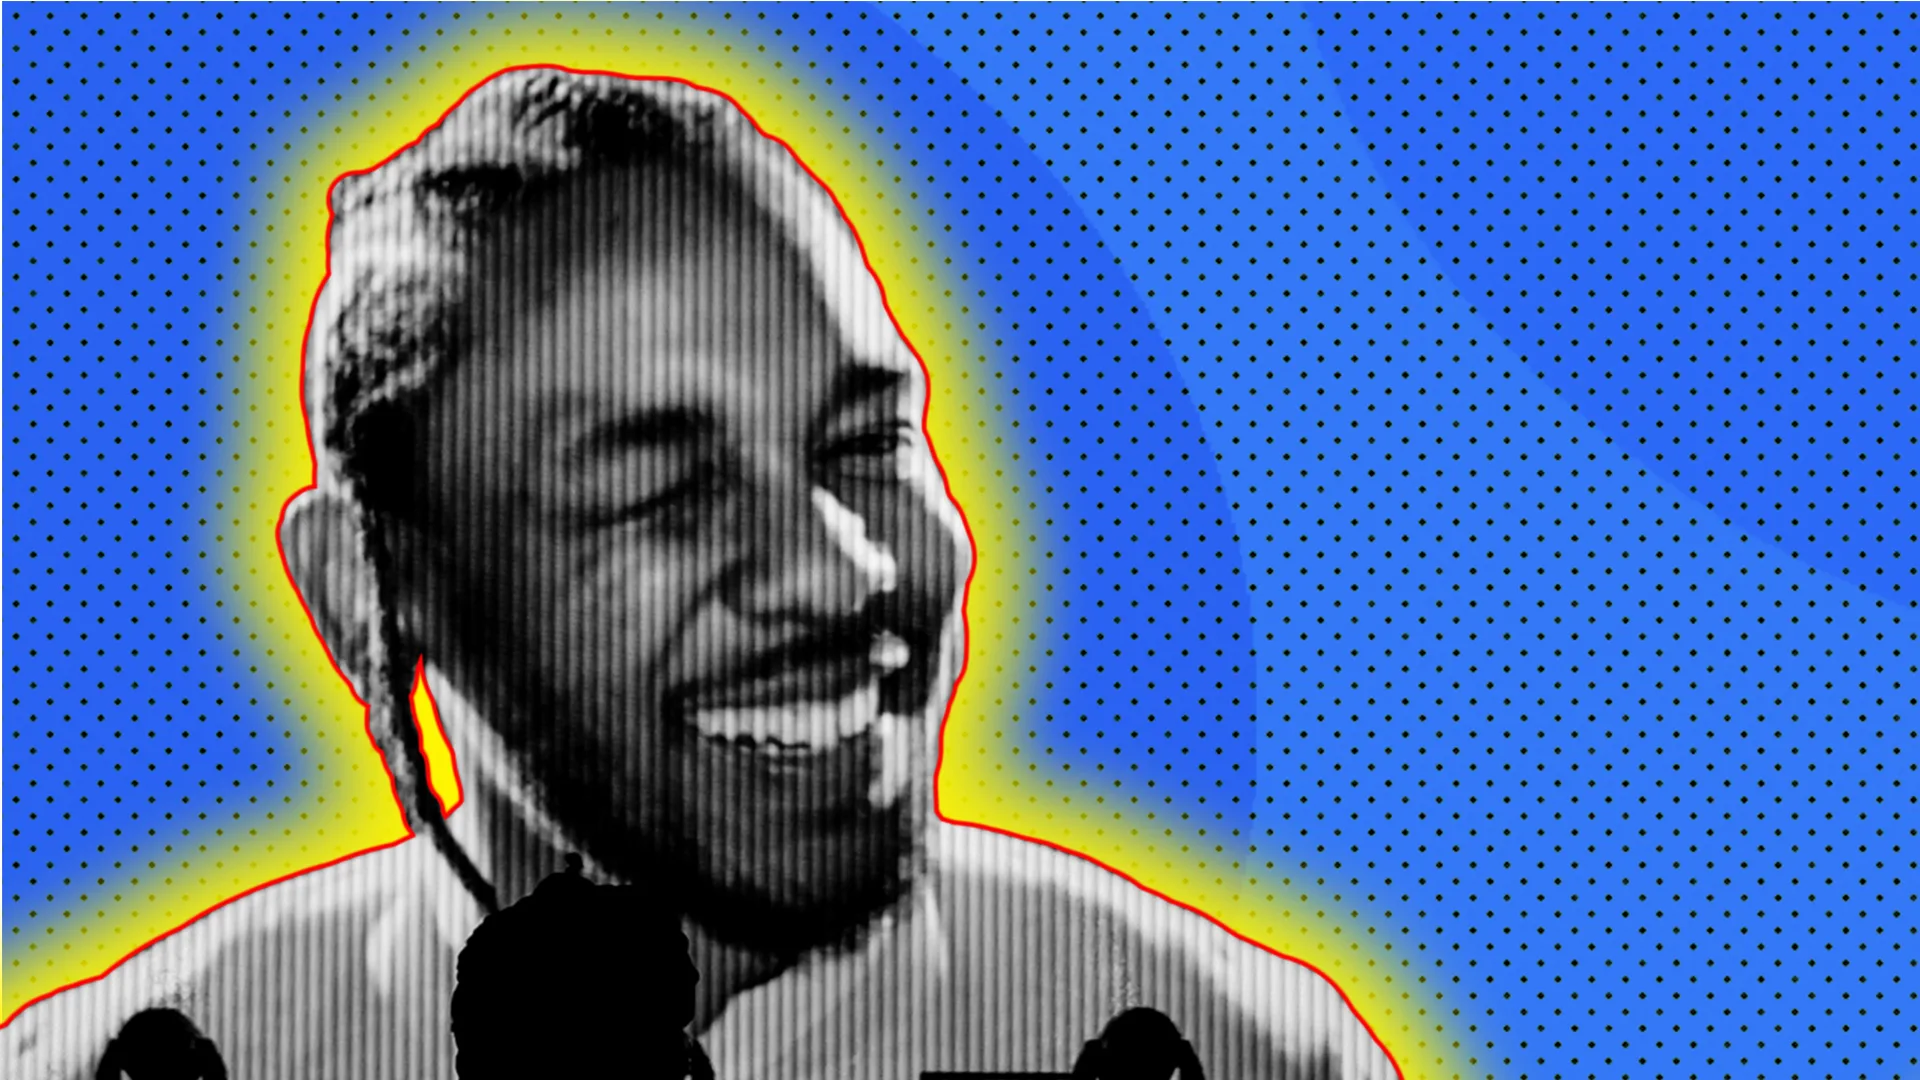 Kendrick Lamar on a big screen with a polkadot background and a glow around the image